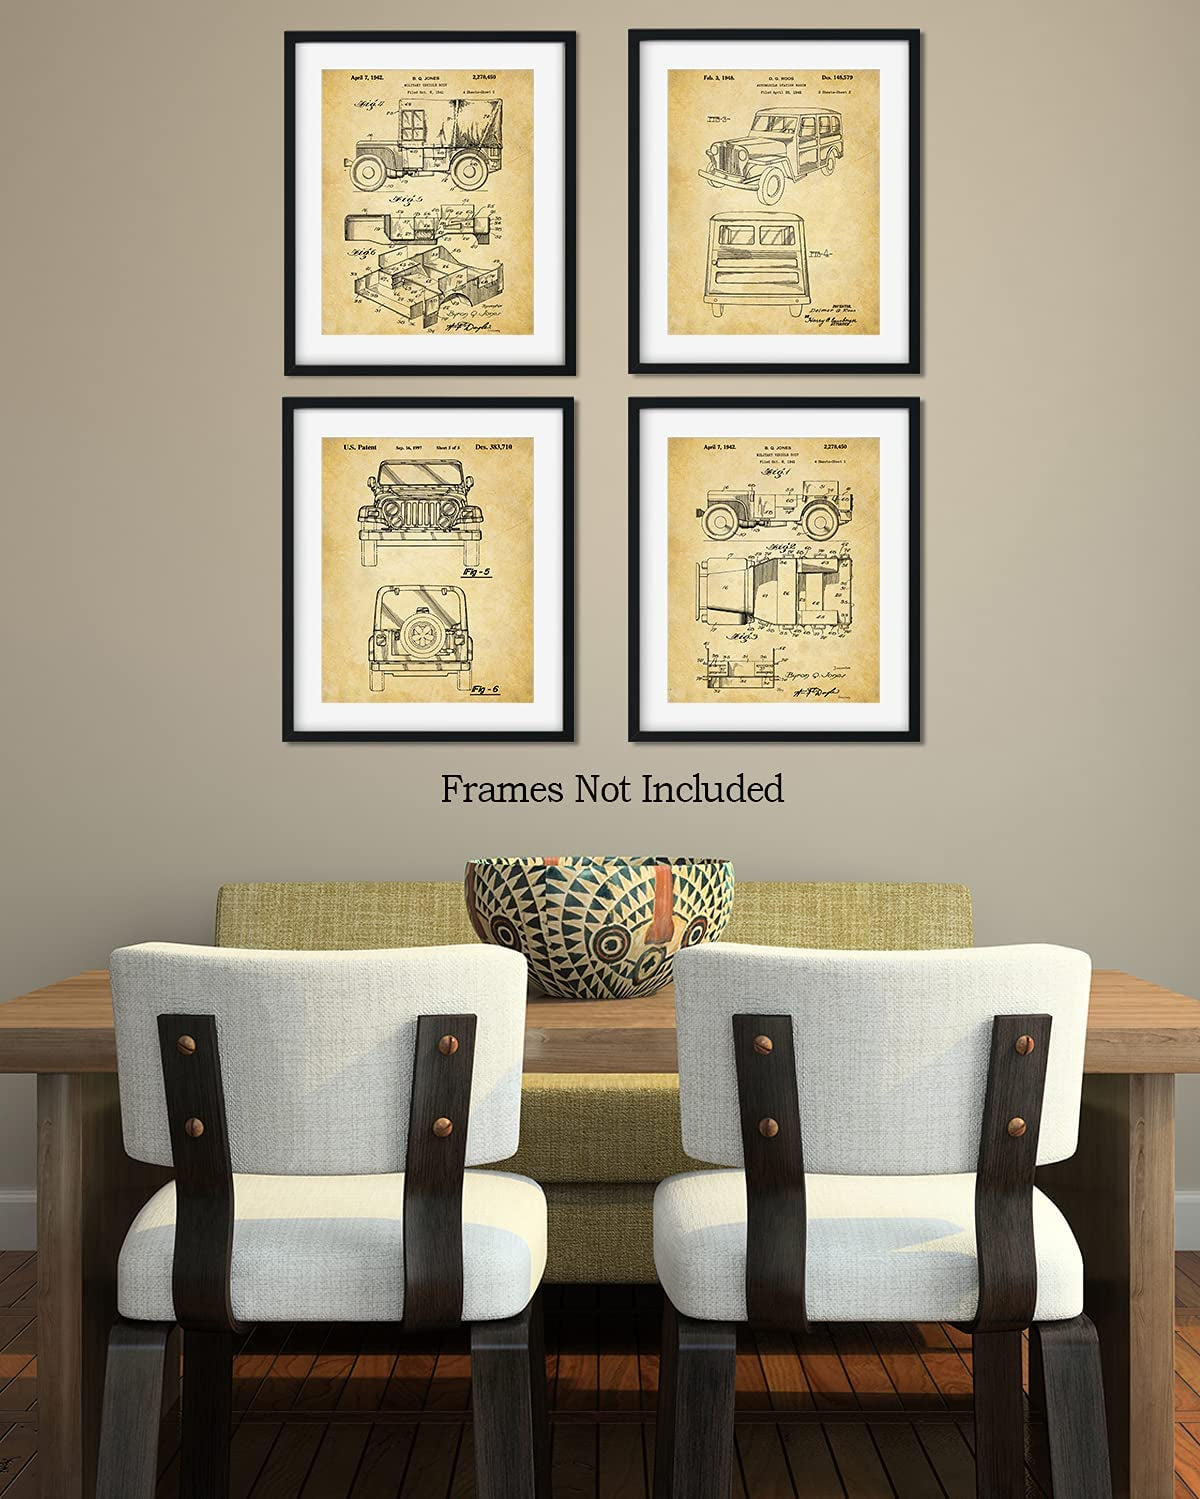 Jeep Patents - a Set of Four Jeep Patents Wall Art Decor Prints with Sepia Backgrounds - Unframed Artwork Printed on Photograph Paper